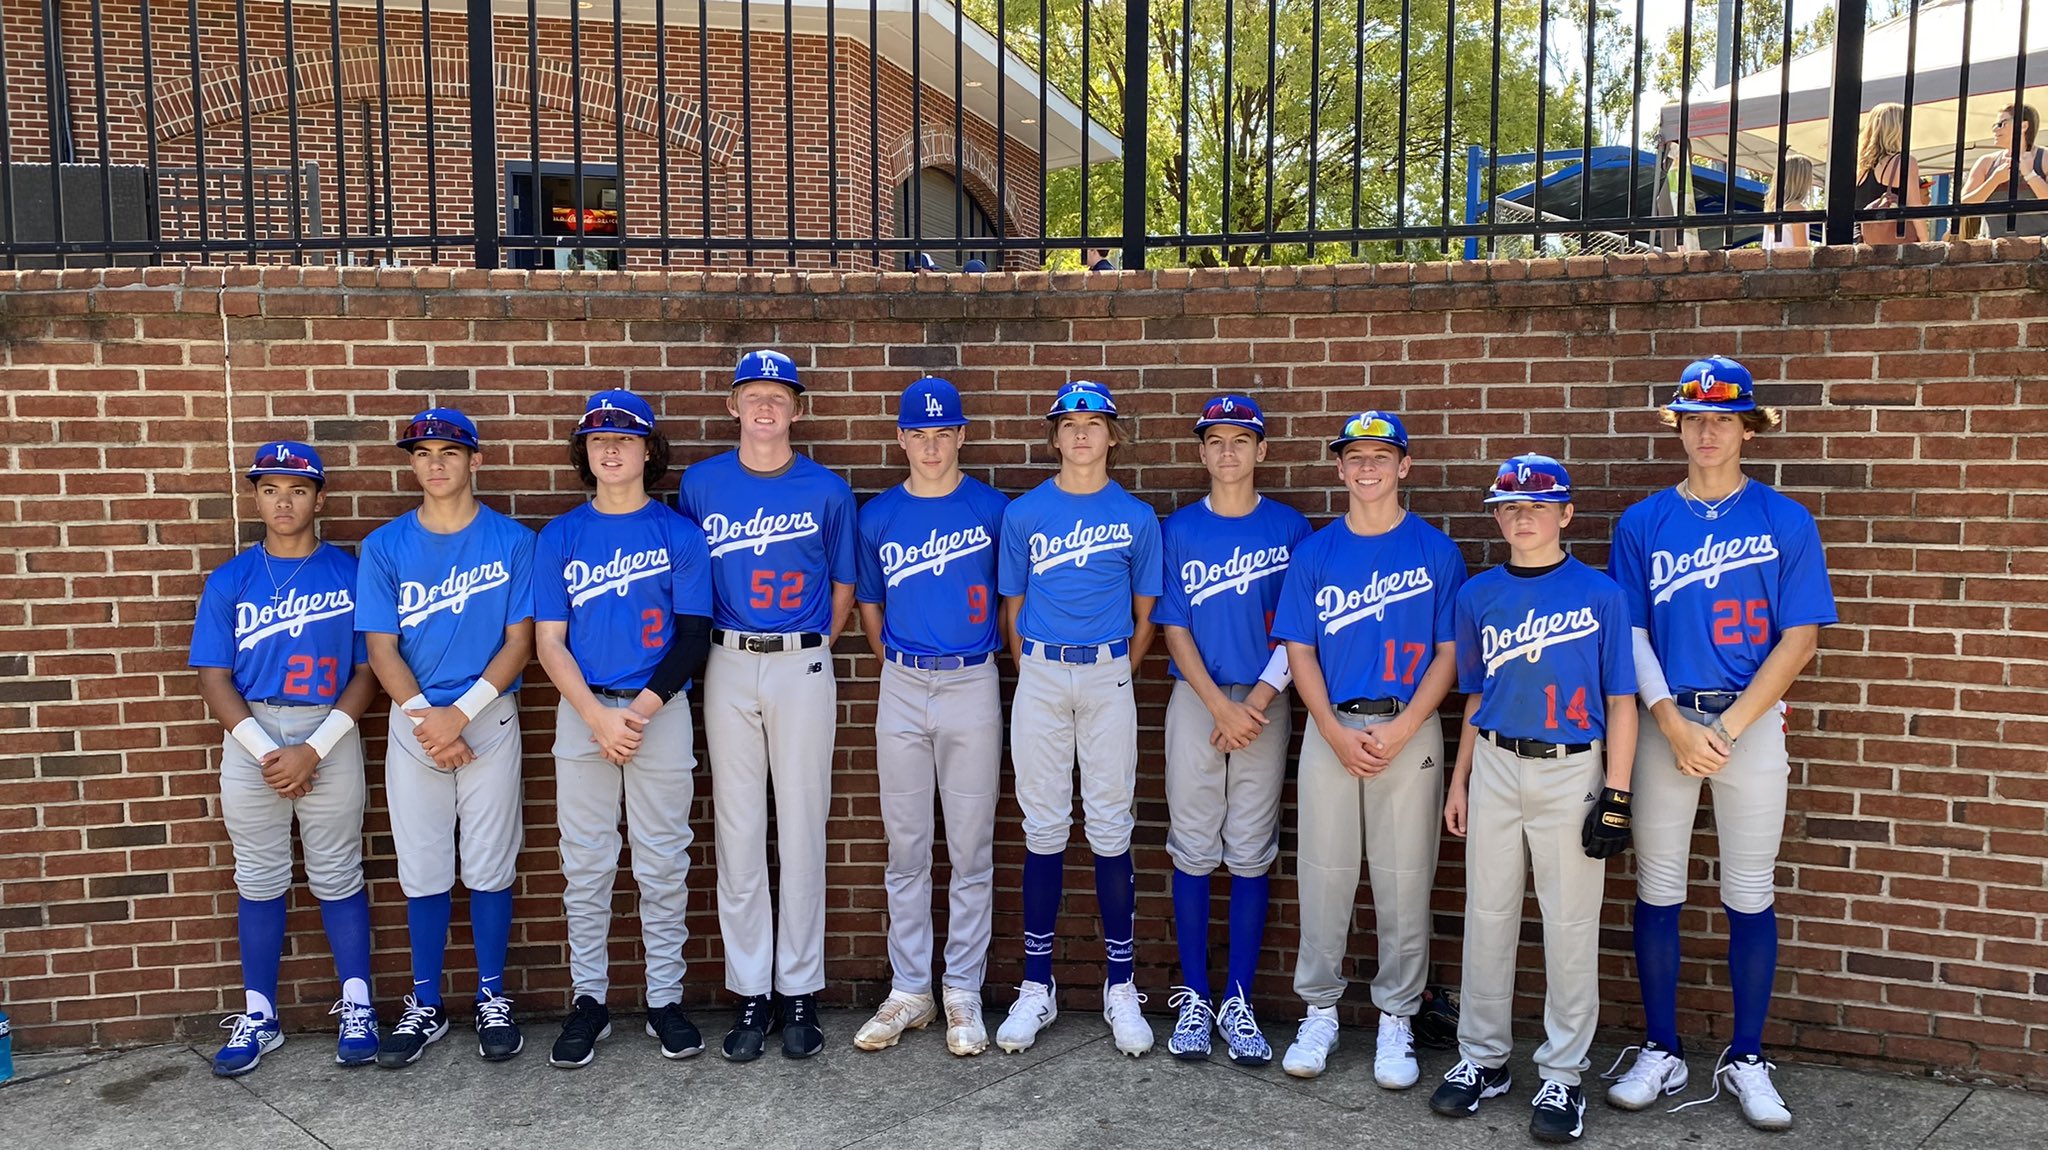 Midwest Dodgers Scout Baseball Team on X: Midwest Dodgers 14u